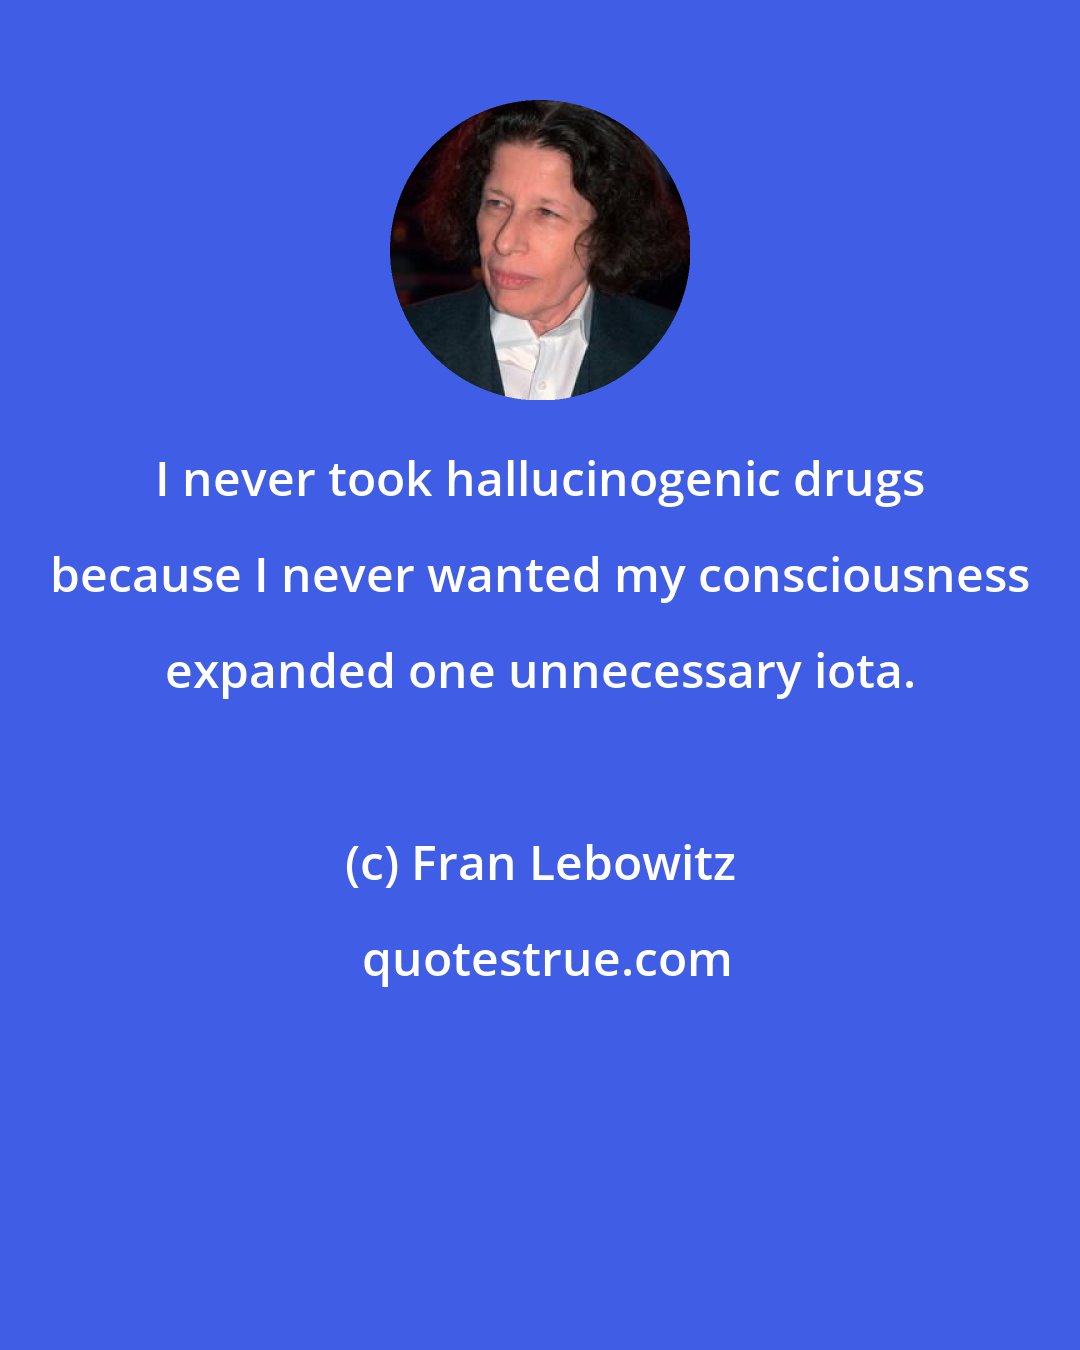 Fran Lebowitz: I never took hallucinogenic drugs because I never wanted my consciousness expanded one unnecessary iota.